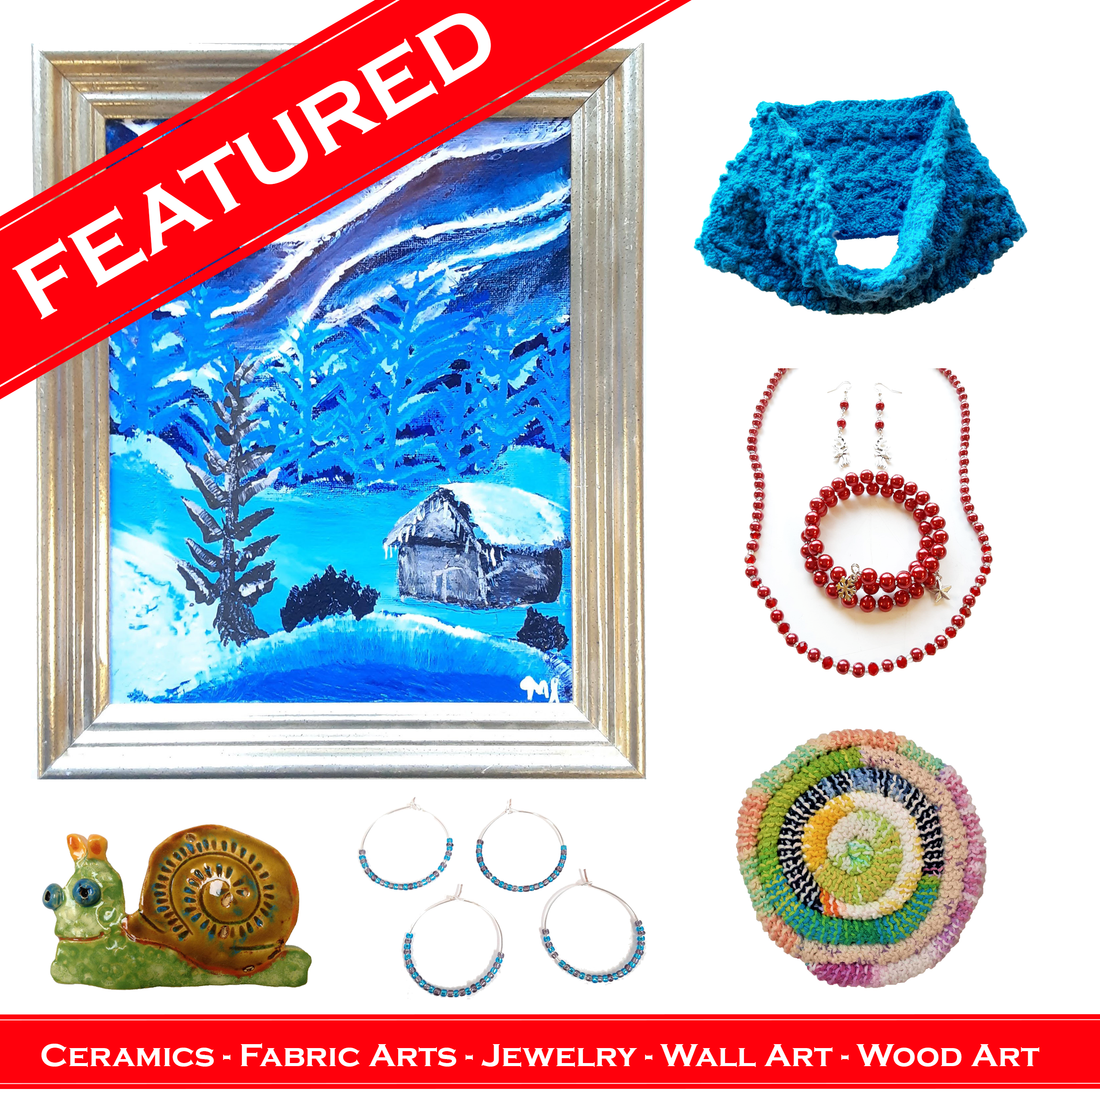 WATCH Resources Art Guild - December 2020 Features Ceramics, Fabric Arts, Fresh Fish, Jewelry, and Wall Art